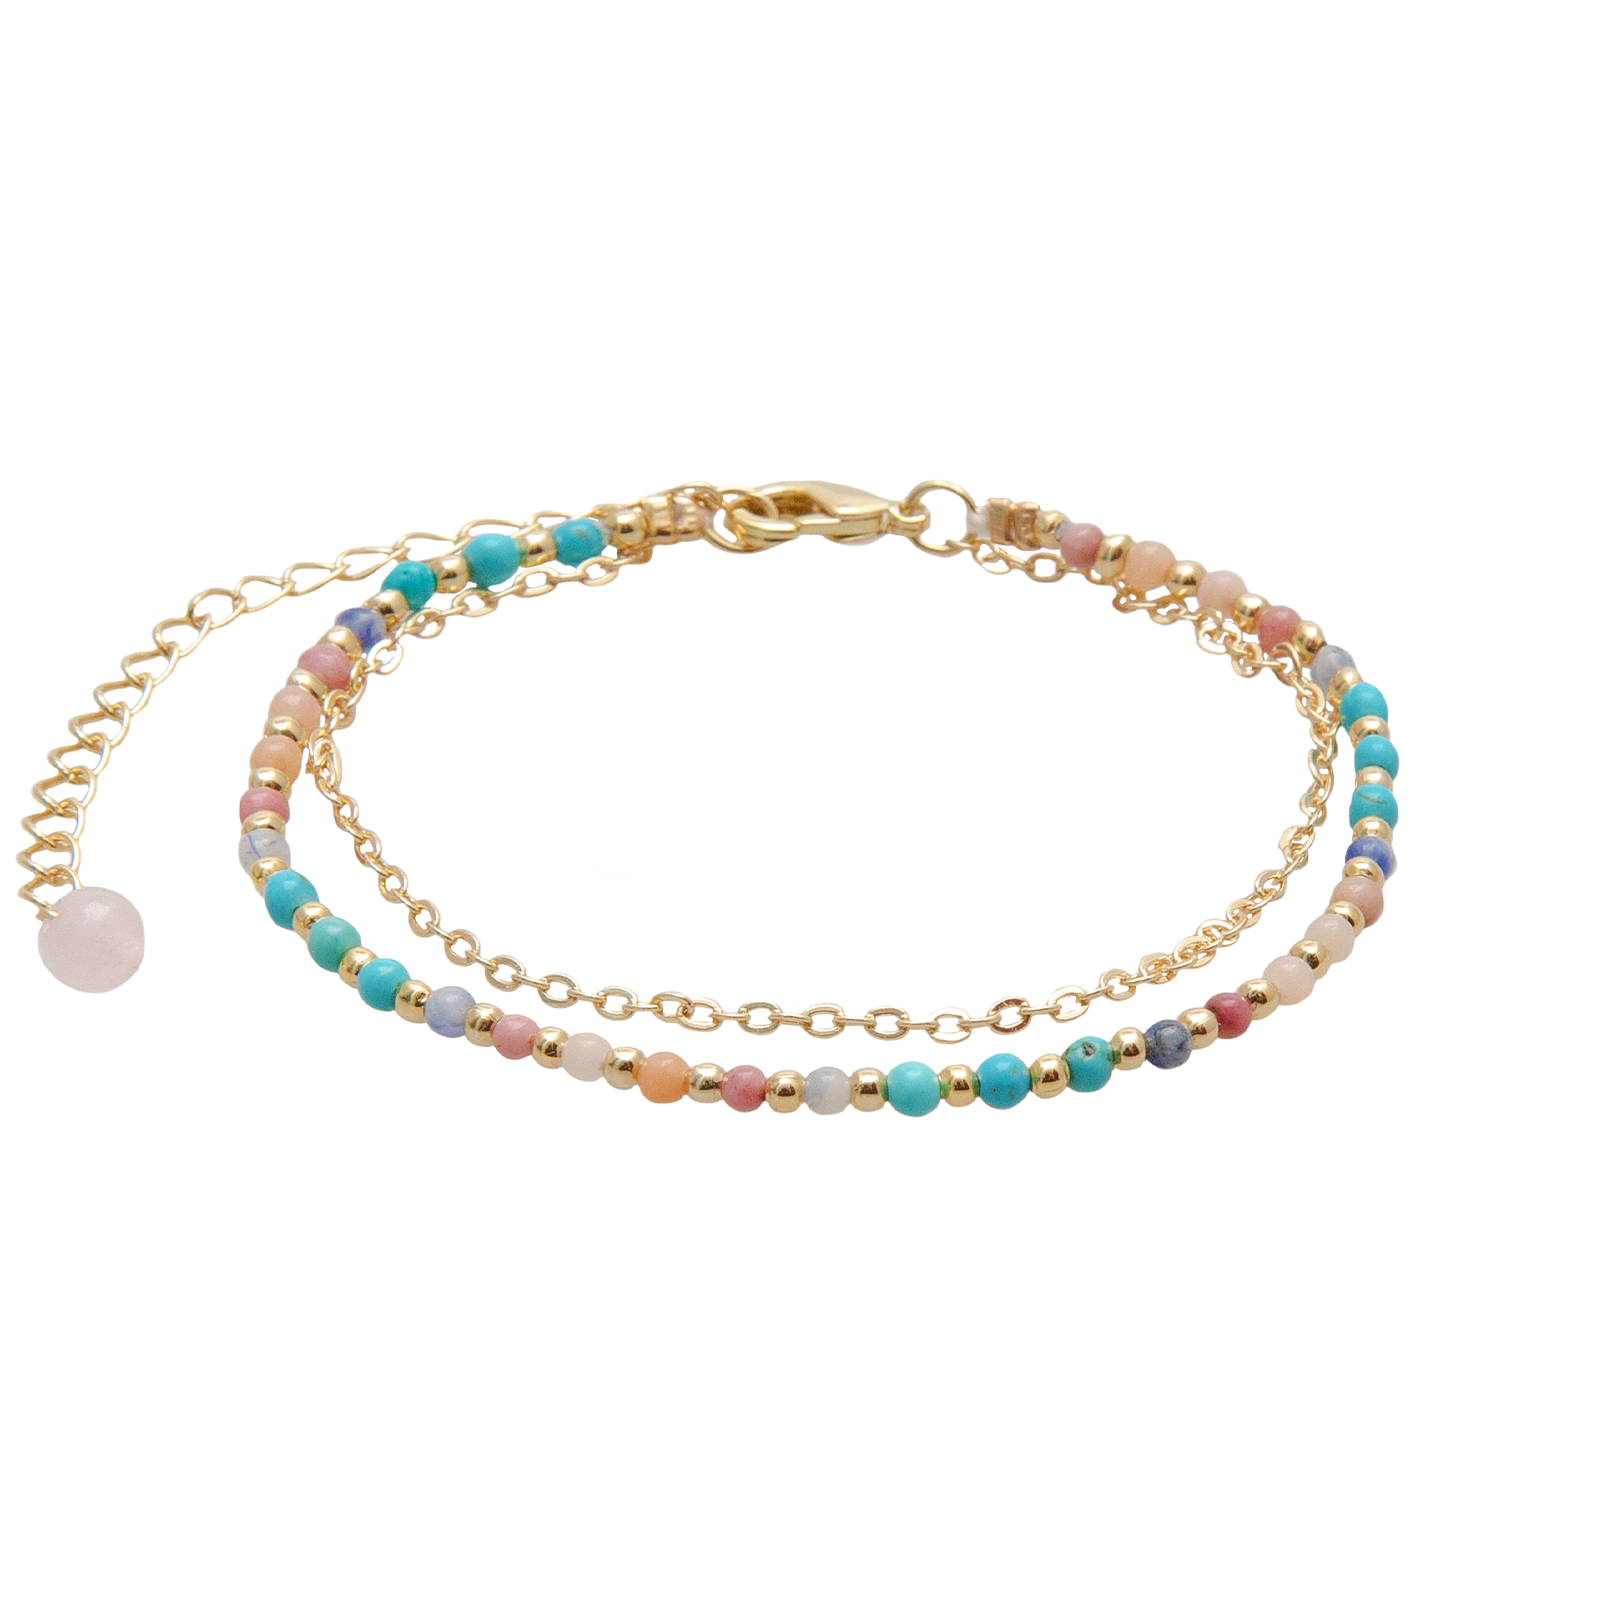 Sunset Chaser 2mm Layered Healing Bracelet from Lotus and Luna